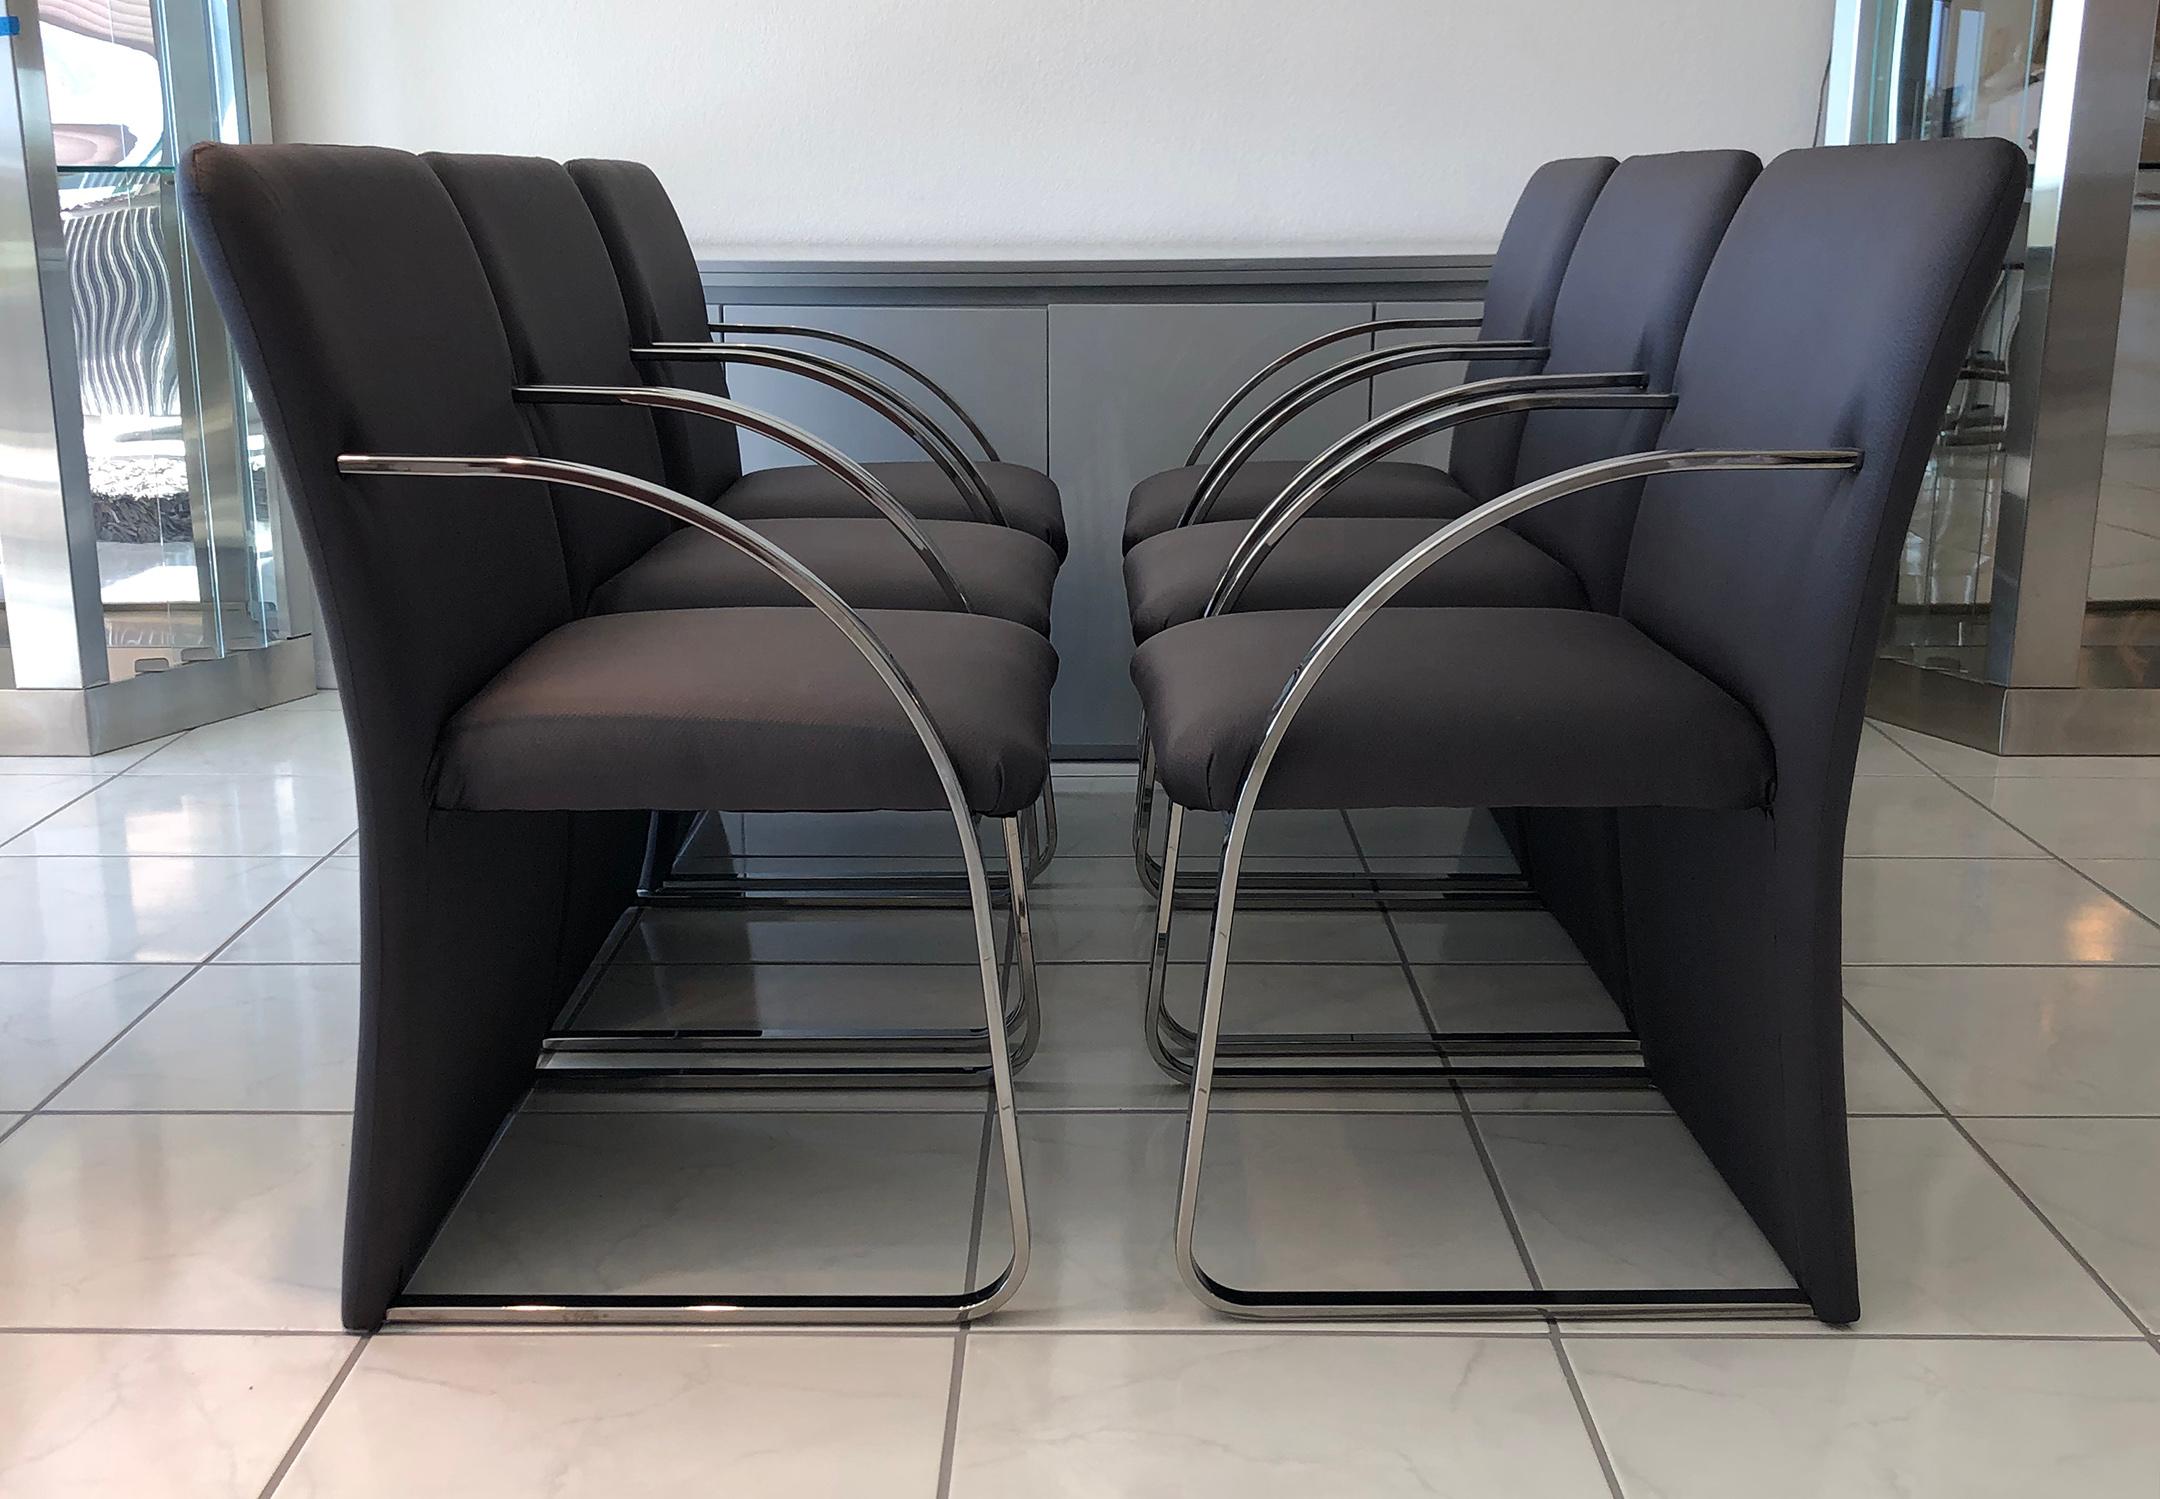 An absolutely stunning set of 6 chrome, post modern dining chairs by Rougier. These upholstered and chrome dining chairs feature fully upholstered backs with front chrome legs and arms. 

This sleek and modern design is evocative of Milo Baughman